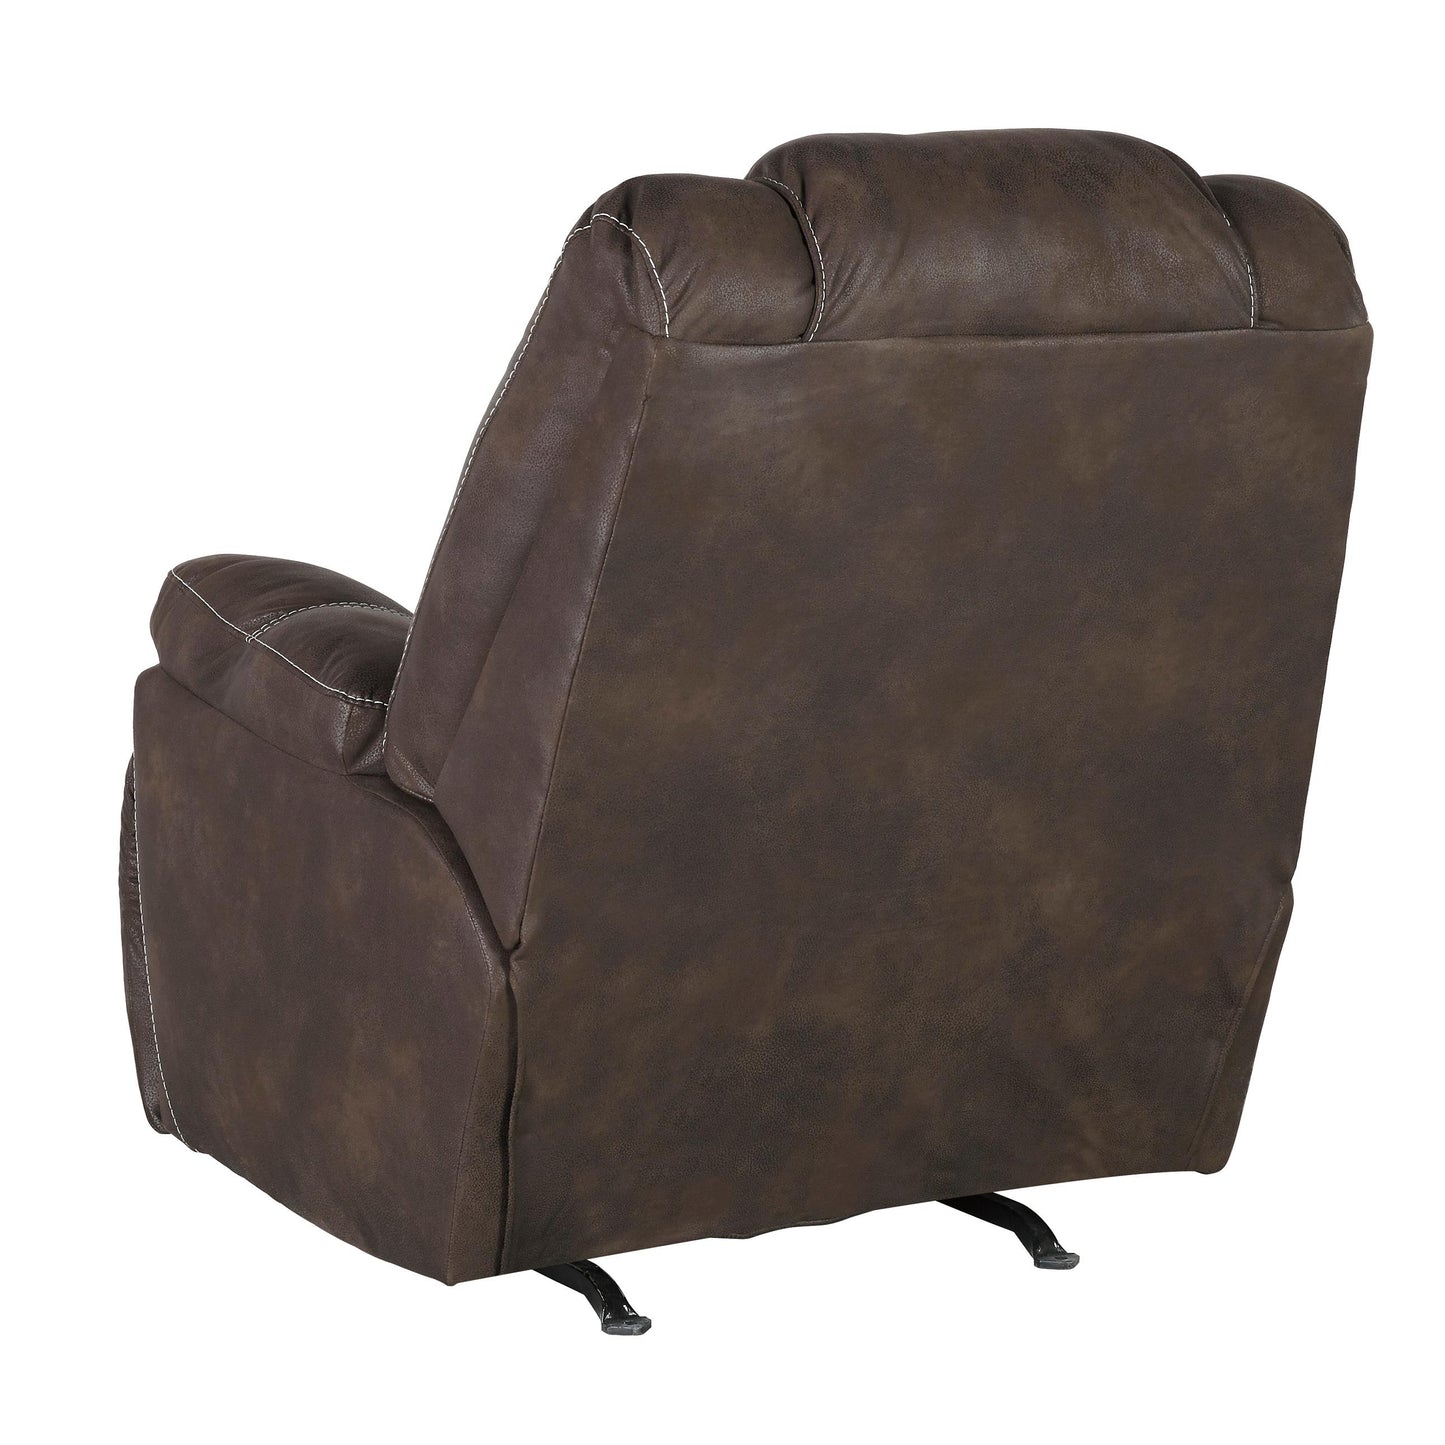 Signature Design by Ashley Warrior Fortress Rocker Leather Look Recliner 4670125 IMAGE 3